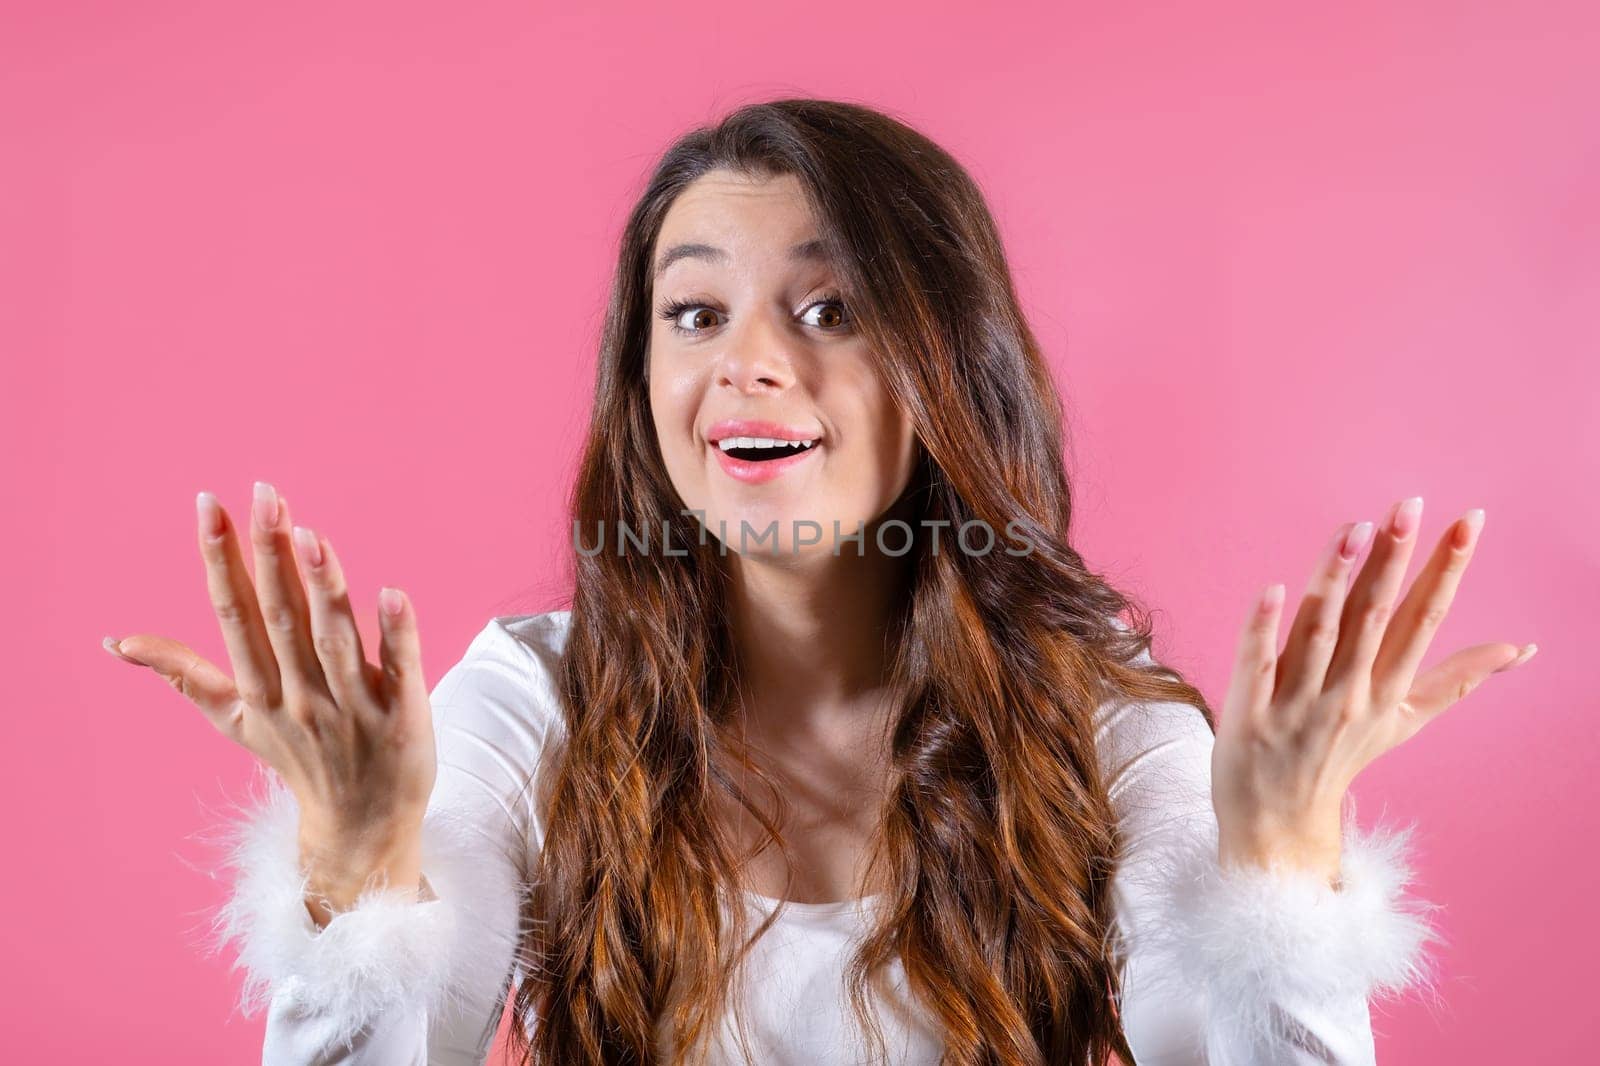 Portrait of a cheerful young woman happily gesturing with her hands on the pink background